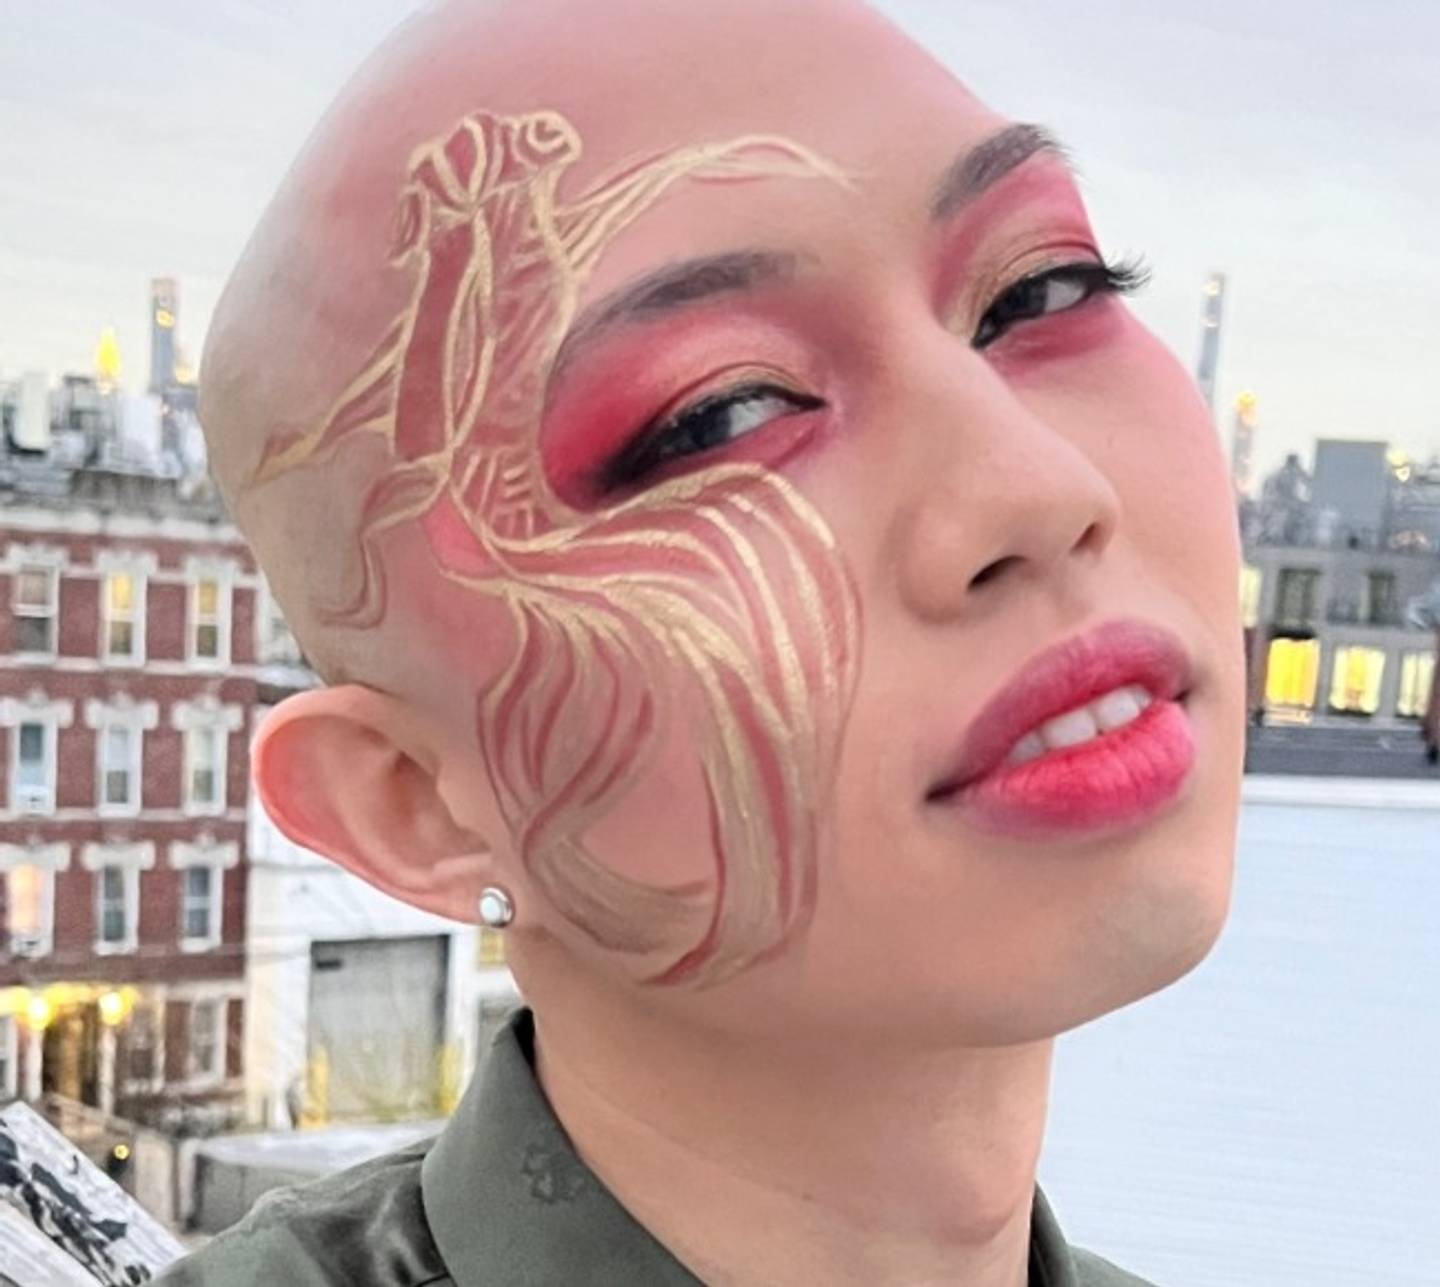 Johnathan Nguyen wears a goldfish-inspired makeup look to celebrate the Lunar New Year